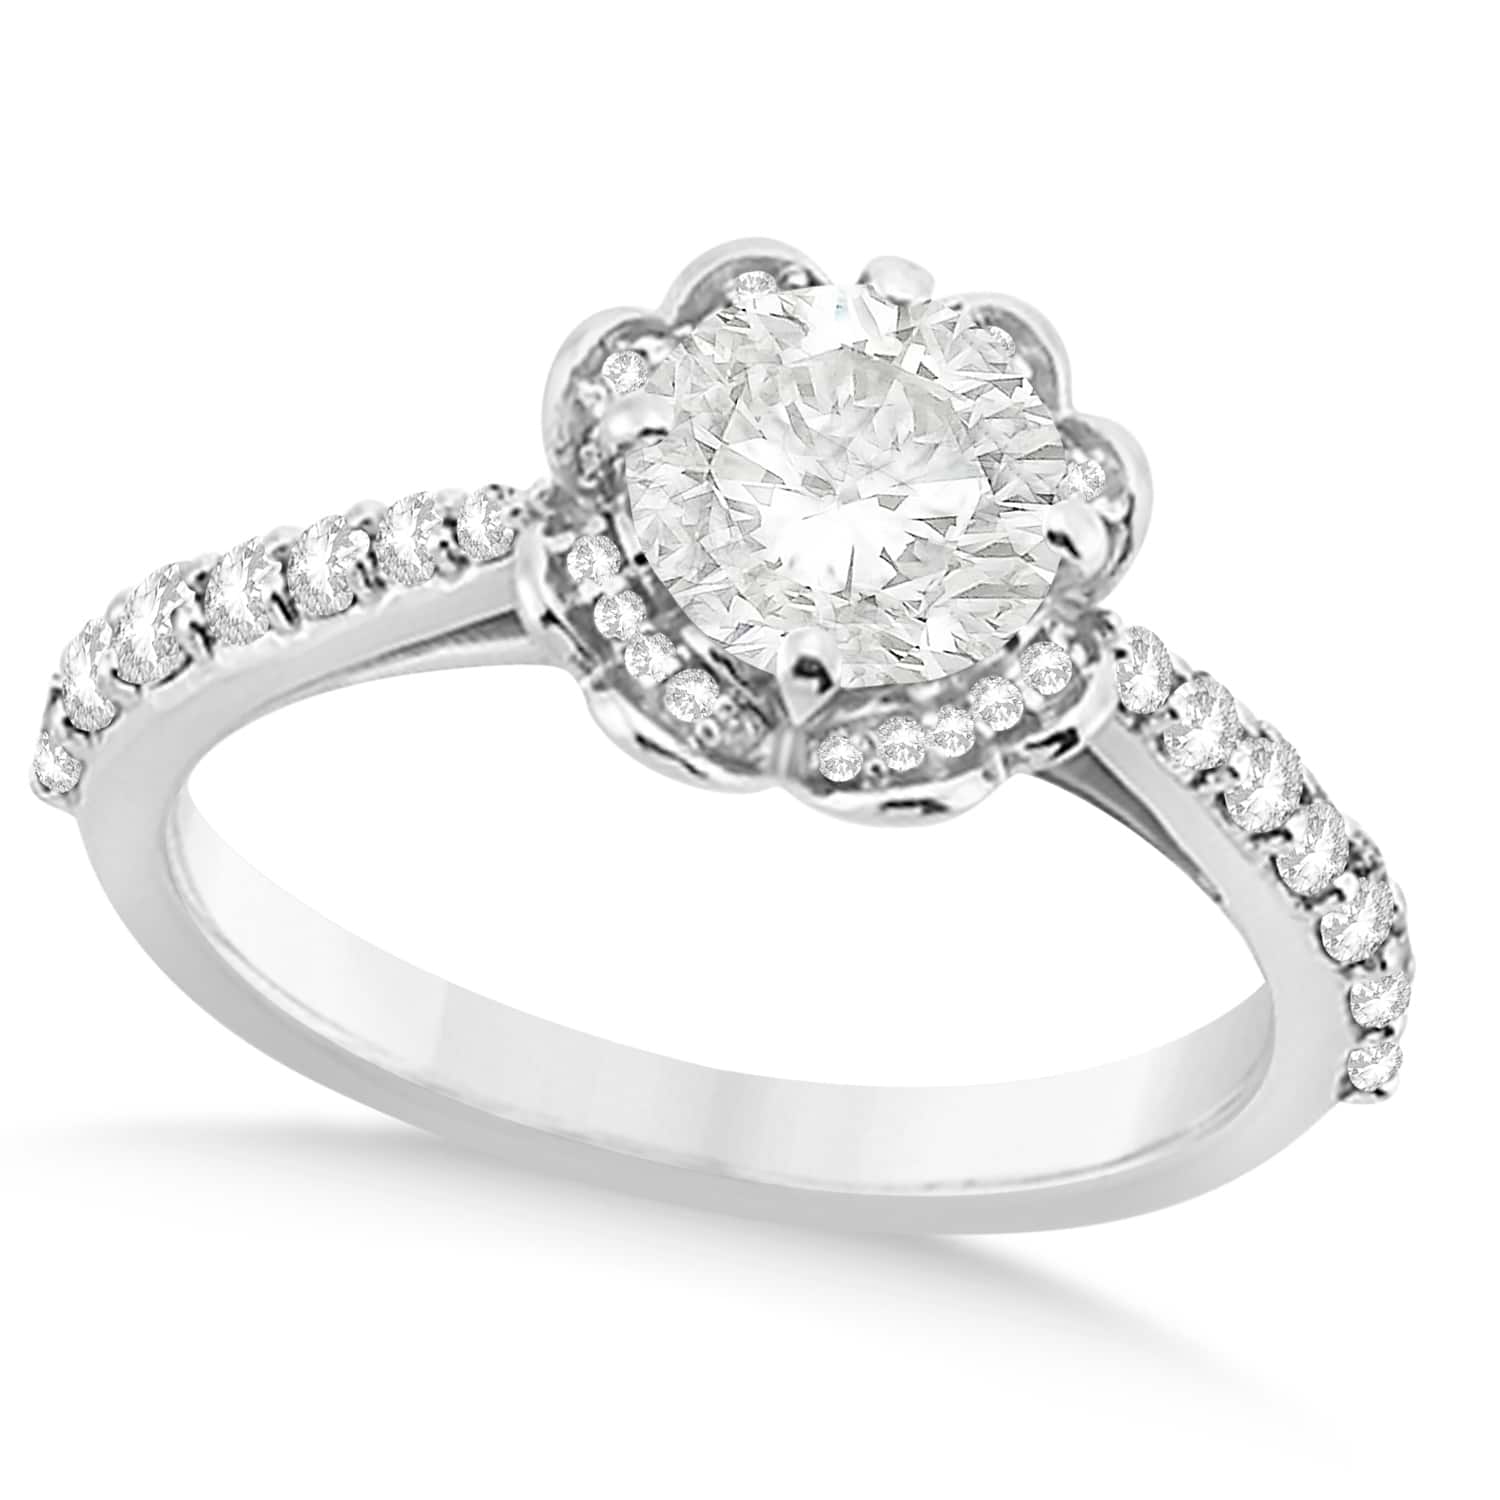 Round Floral Halo Diamond Engagement Ring 18k White Gold 1.38ct